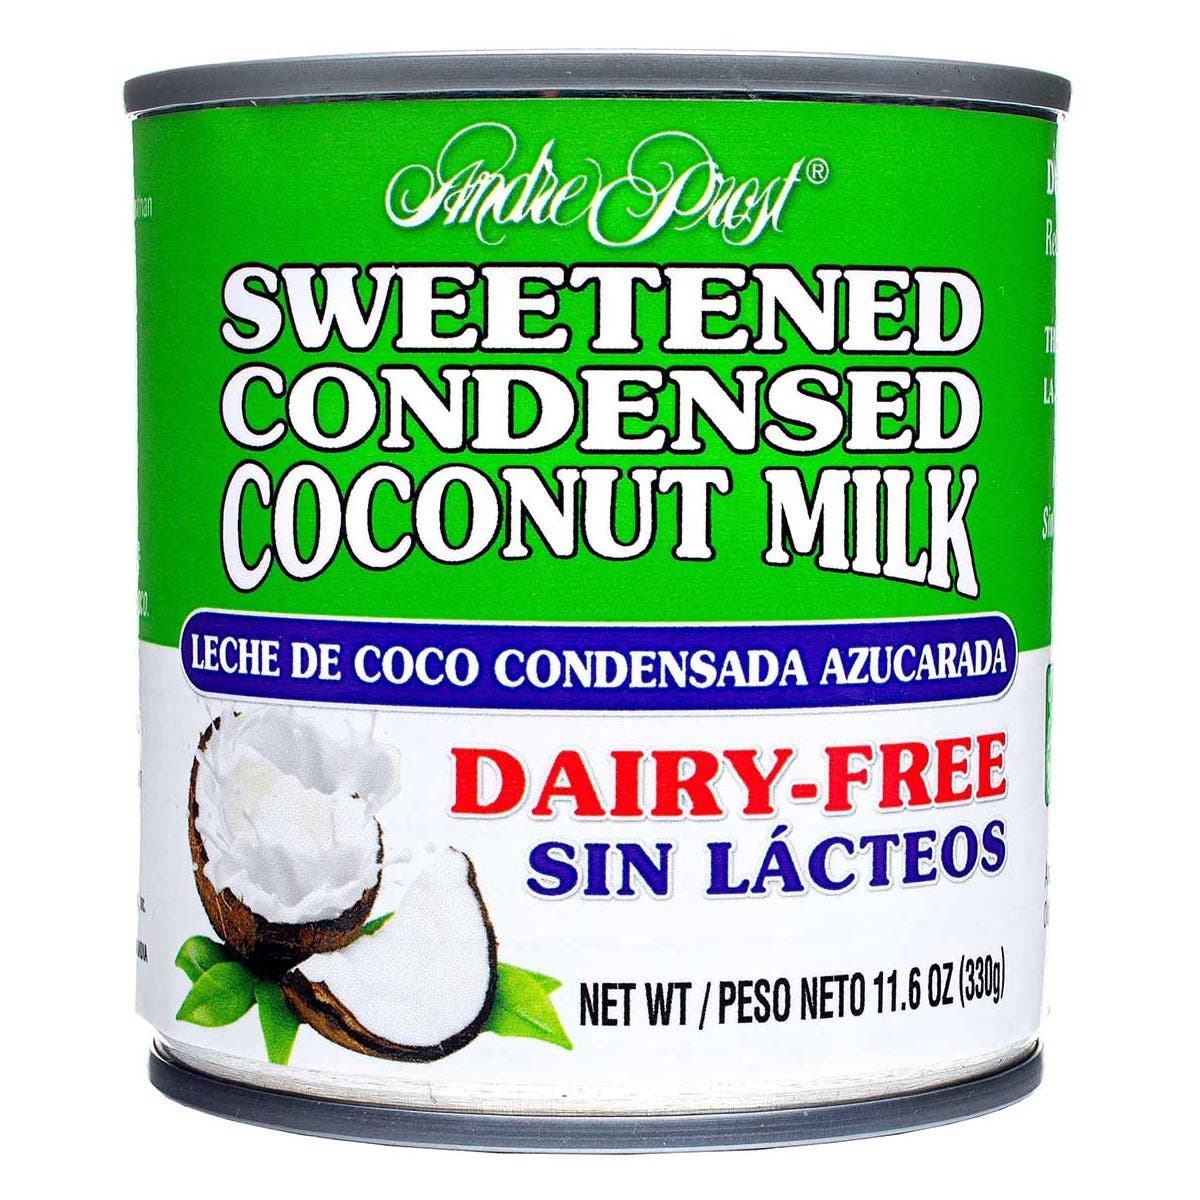 Picture of Andre Prost KHRM00347382 11.6 oz Sweetened Condensed Coconut Milk